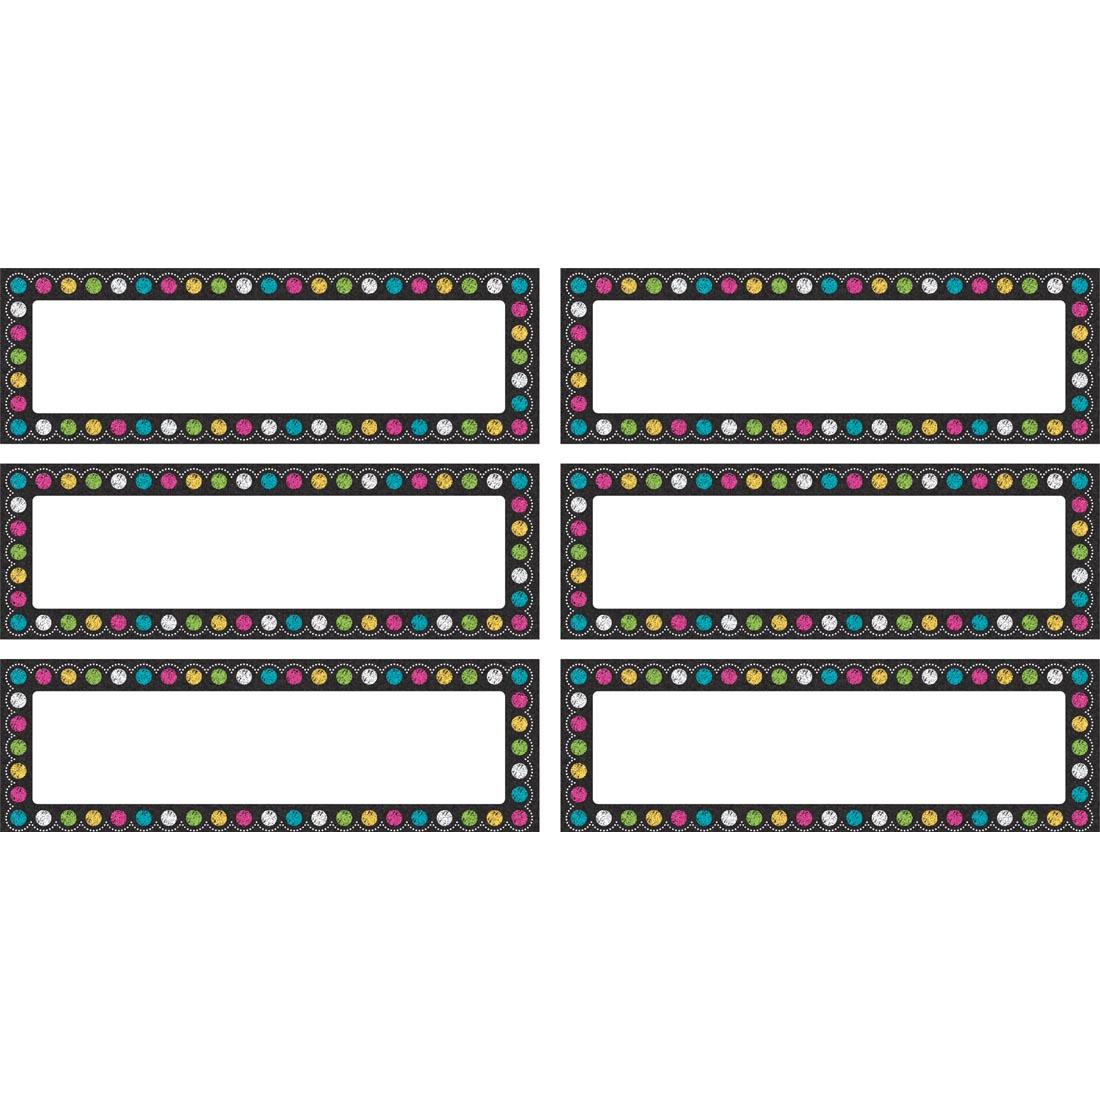 Labels Magnetic Accents from the Chalkboard Brights collection by Teacher Created Resources